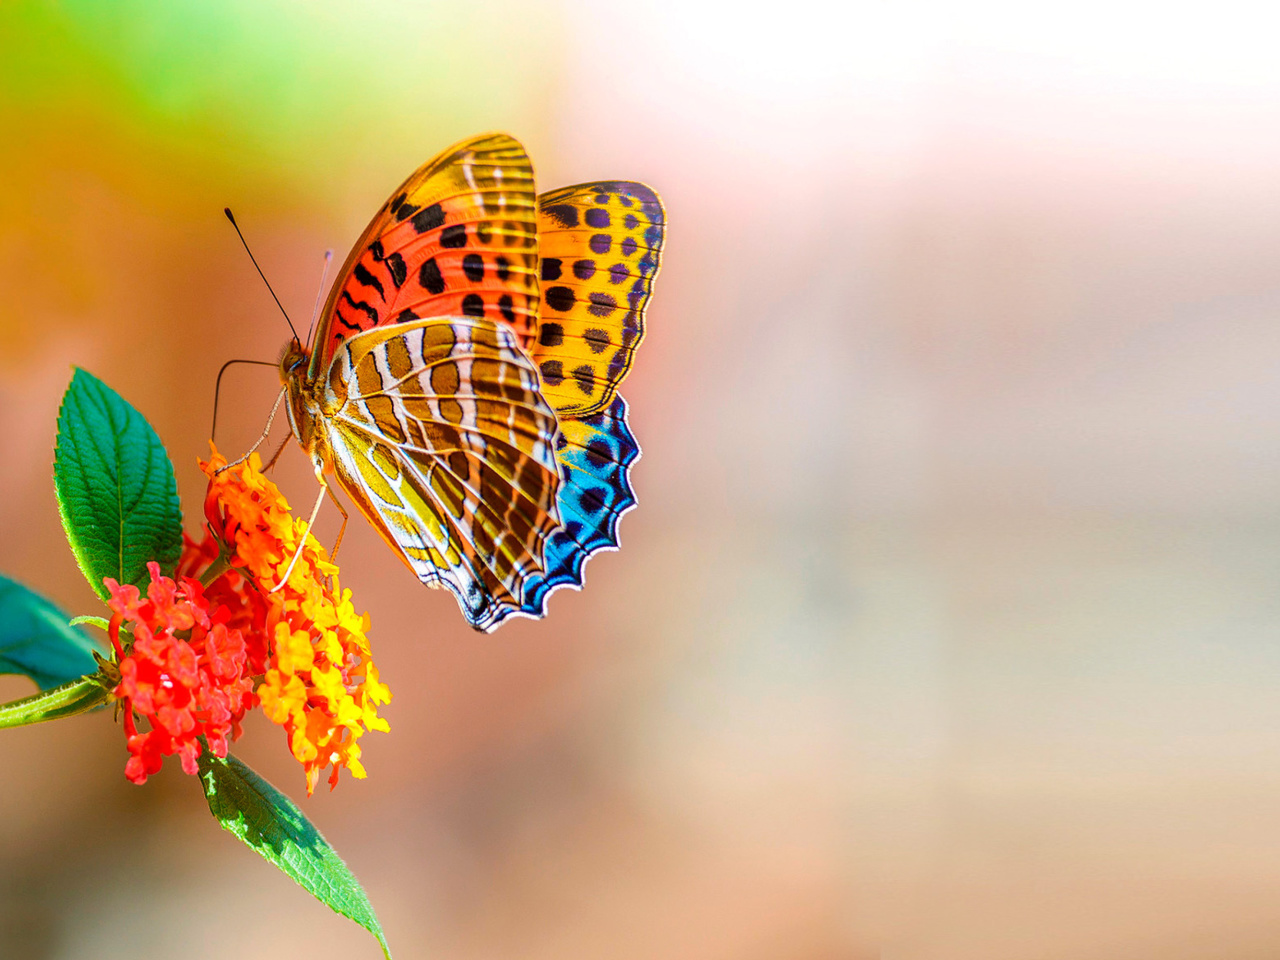 Colorful Animated Butterfly screenshot #1 1280x960